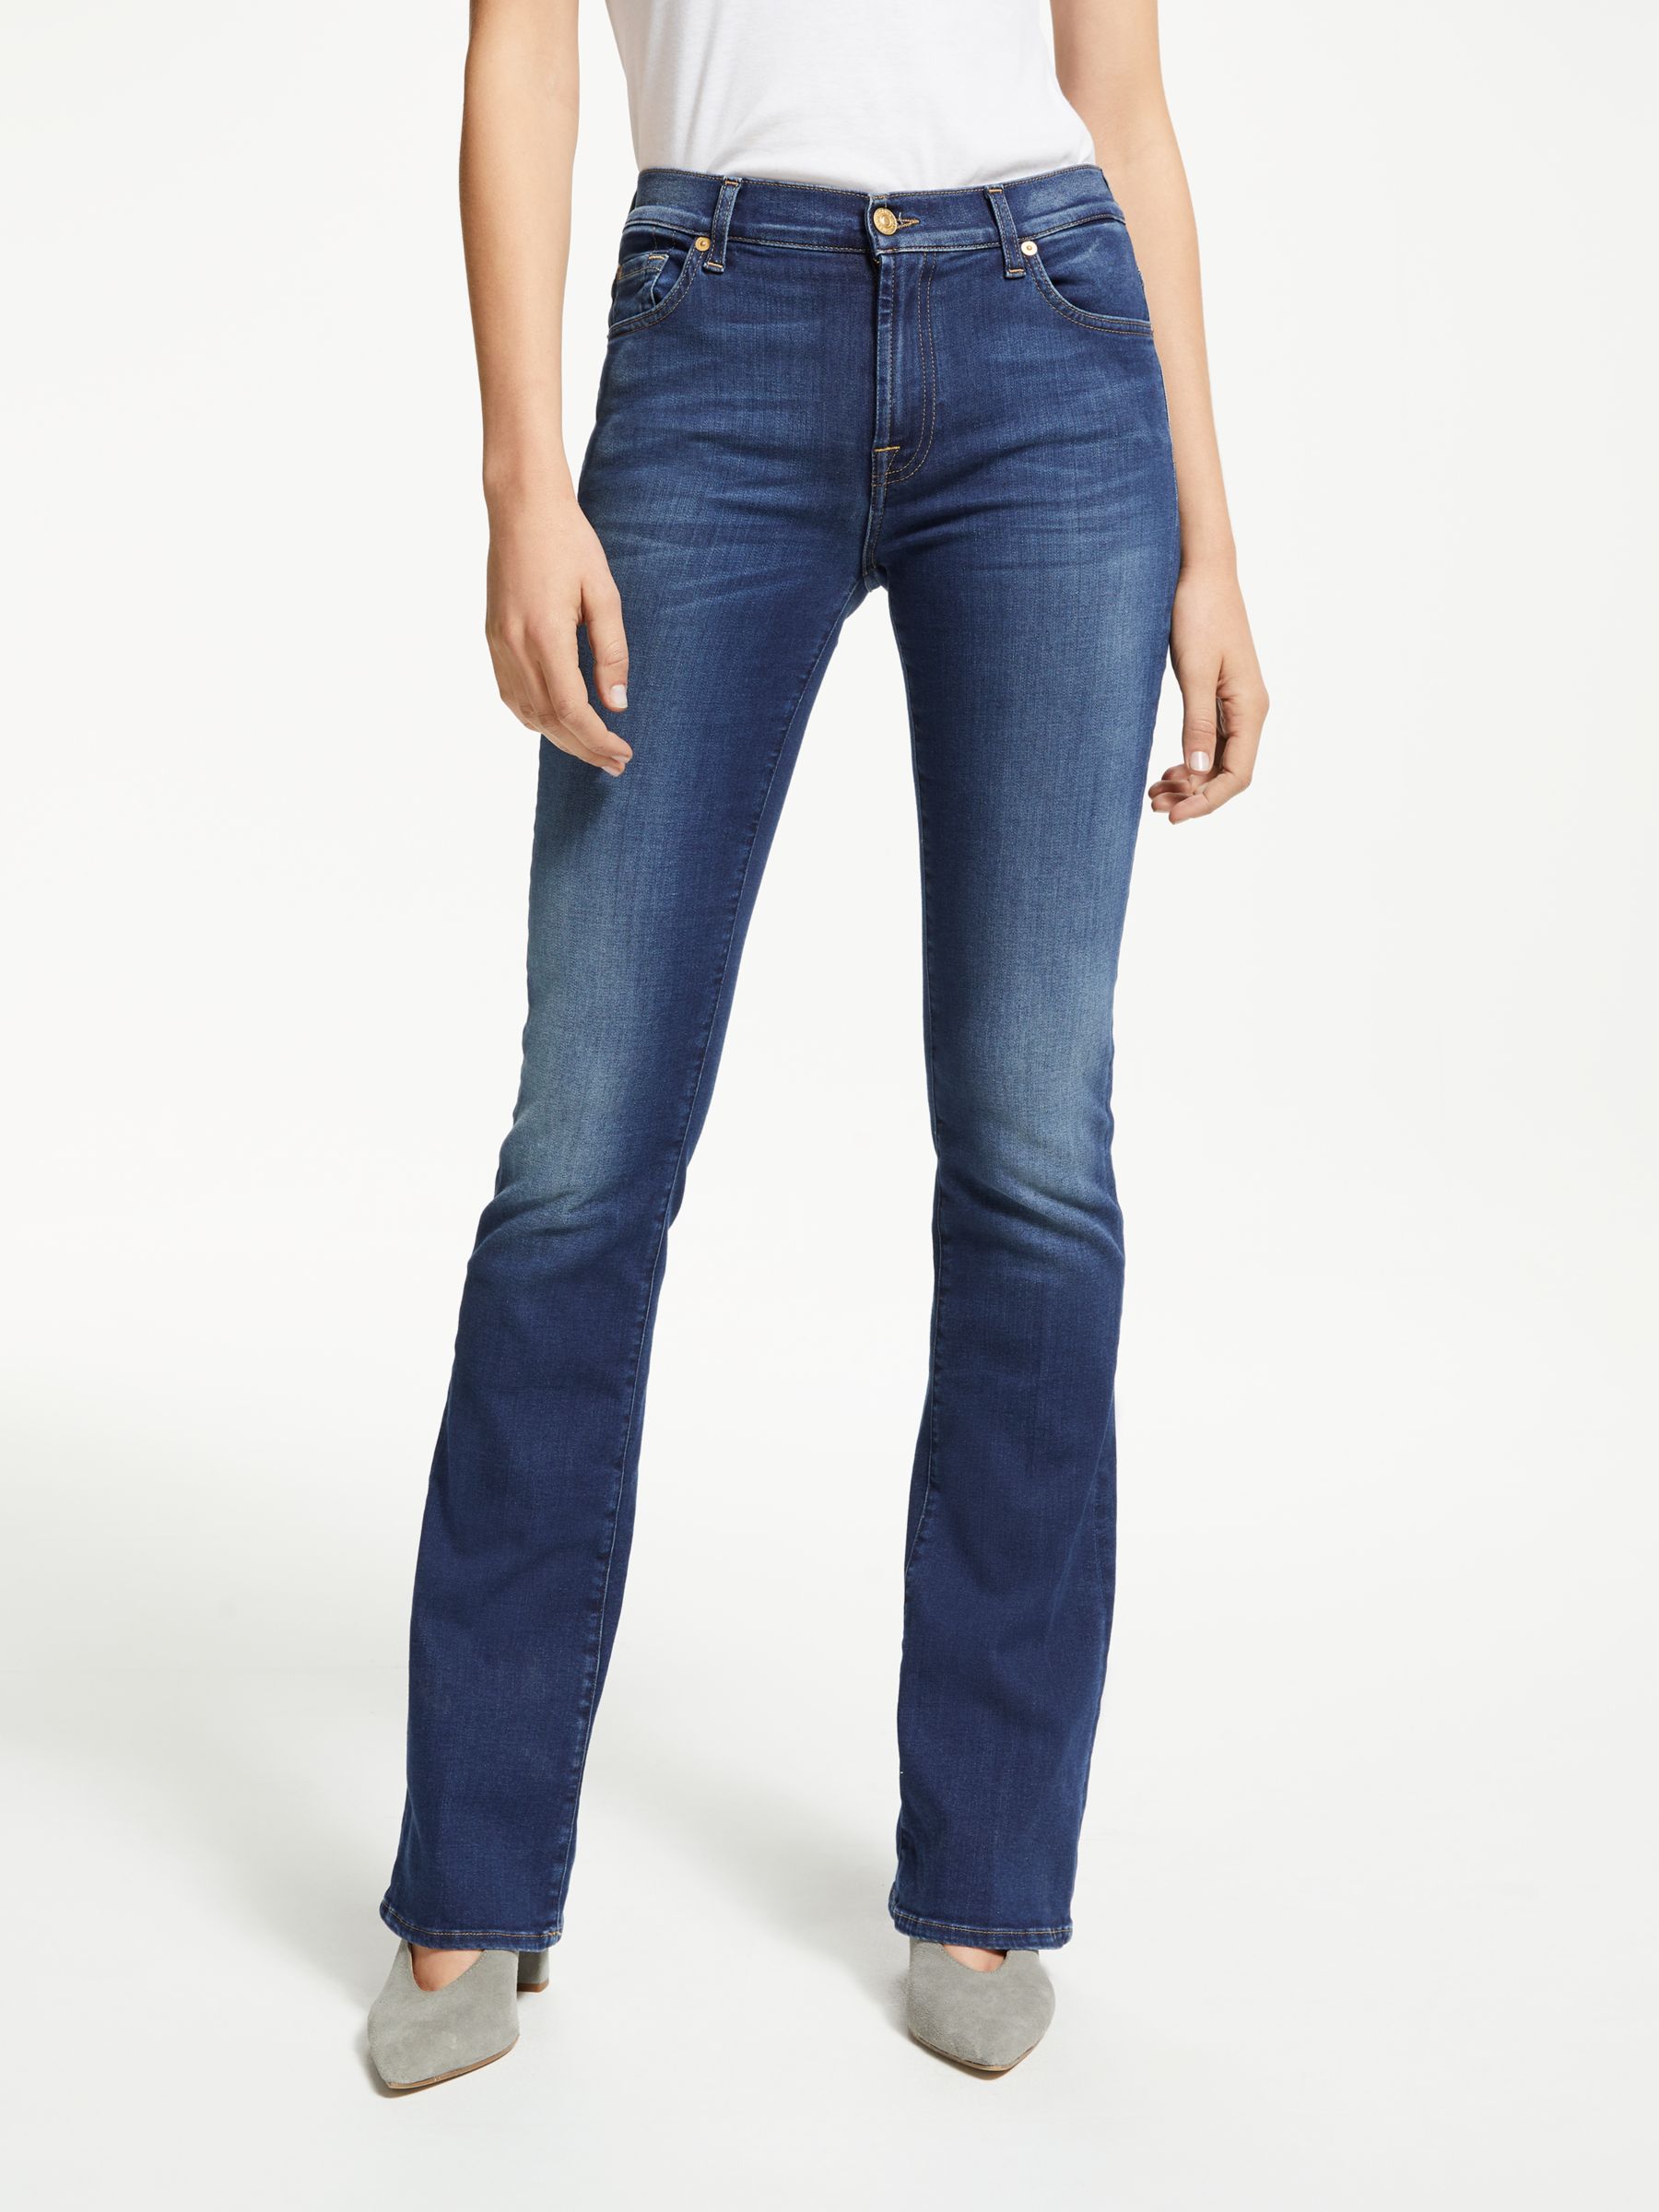 Women S 7 For All Mankind Jeans John Lewis Partners